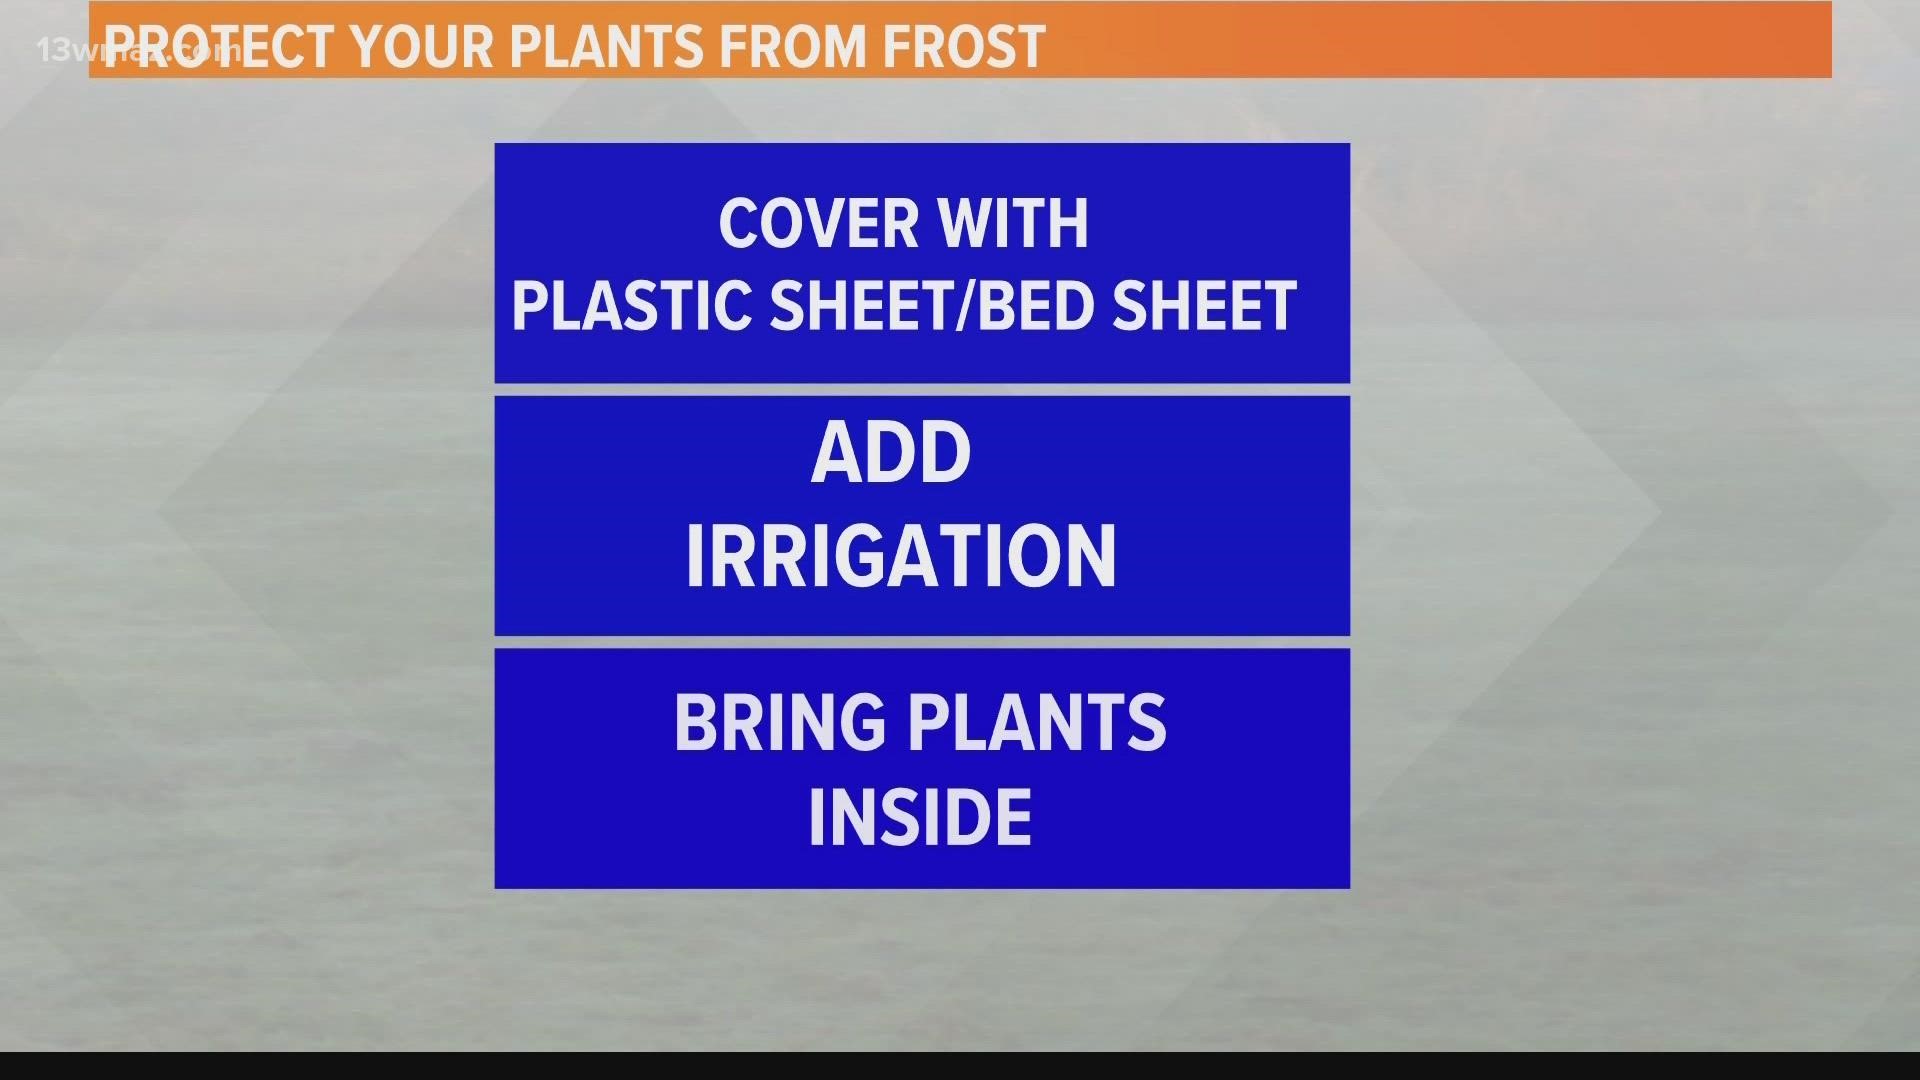 While our warmer weather might have you fooled that frost is far off, climatologically, it's not.